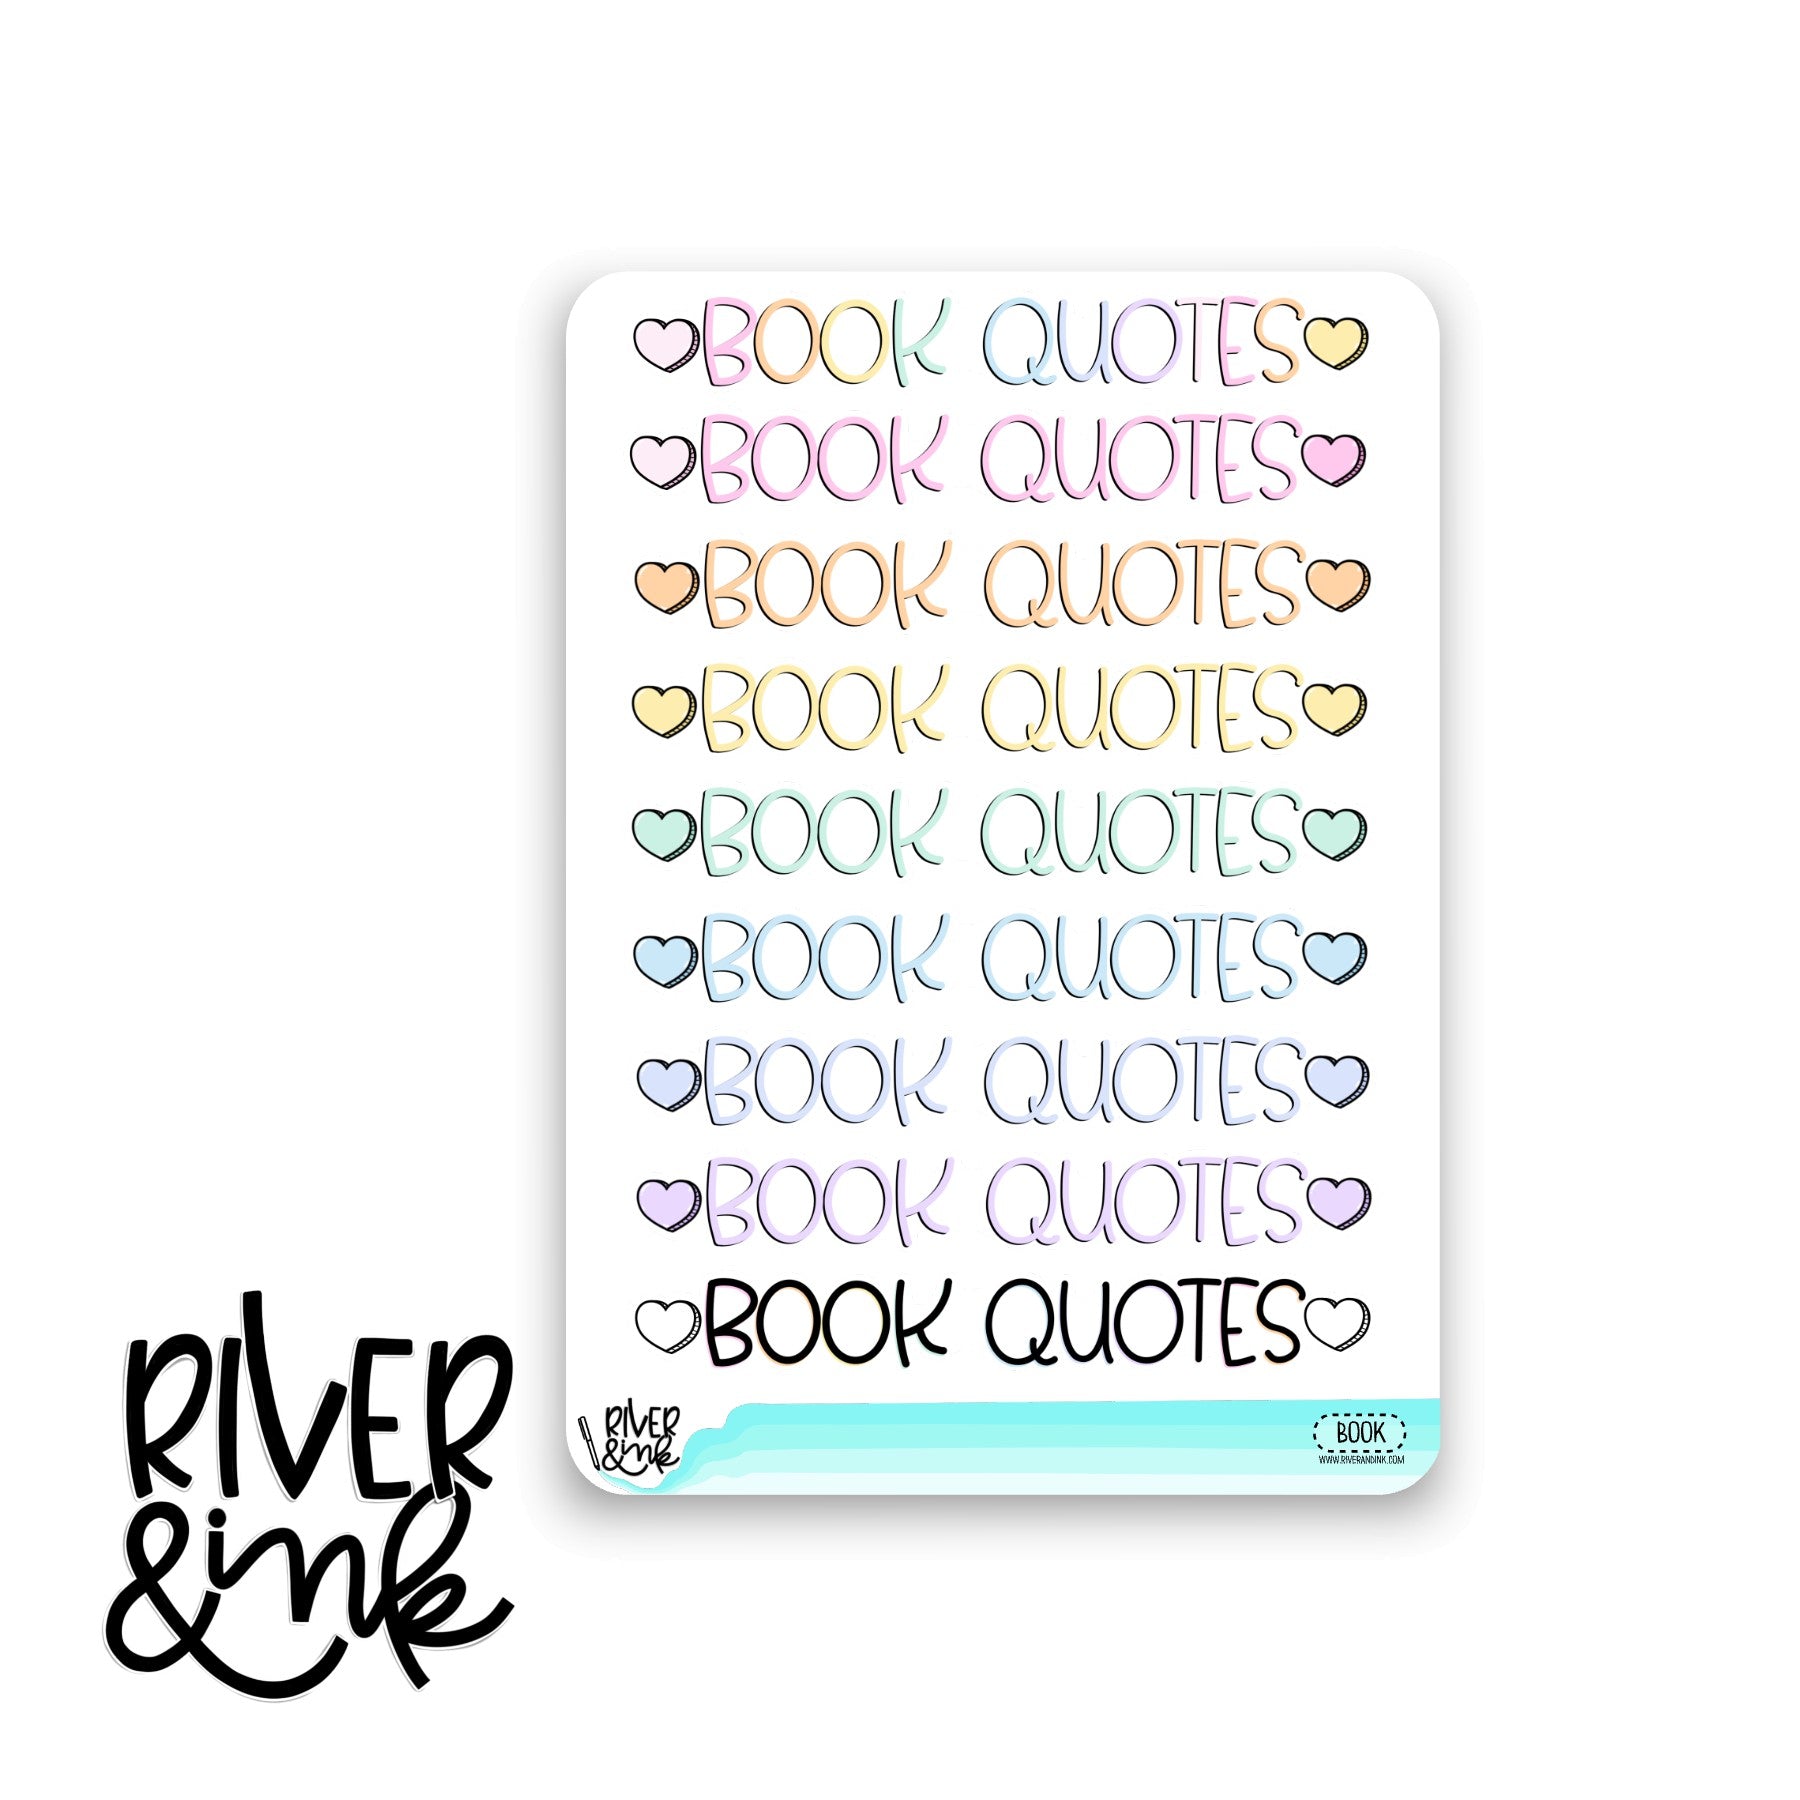 2024 Book Quotes Note Page Headers for Book Journaling Full Sheet | Hand Drawn Planner Stickers